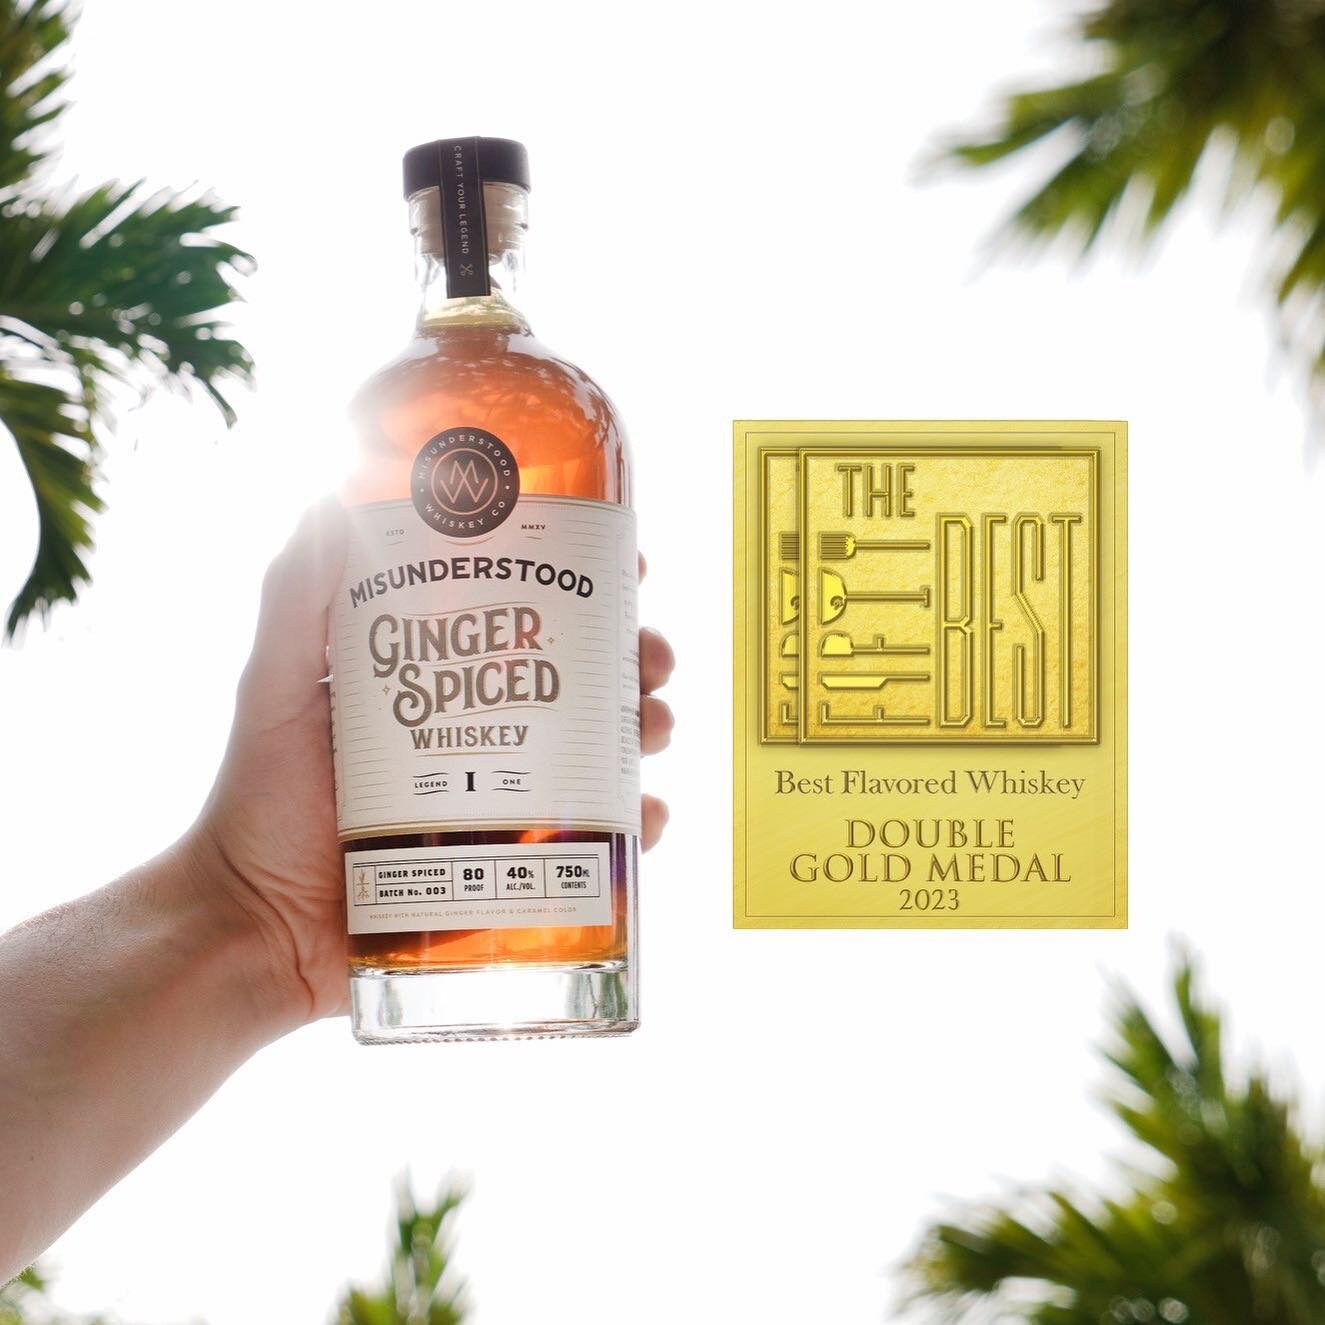 Well this is awesome! We are thrilled to share that our Ginger Whiskey has received a Double-Gold Medal &amp; Best Flavored Whiskey in the &quot;Fifty-Best&quot; tasting competition.

We don't make our whiskey to impress critics, but this one sure fe